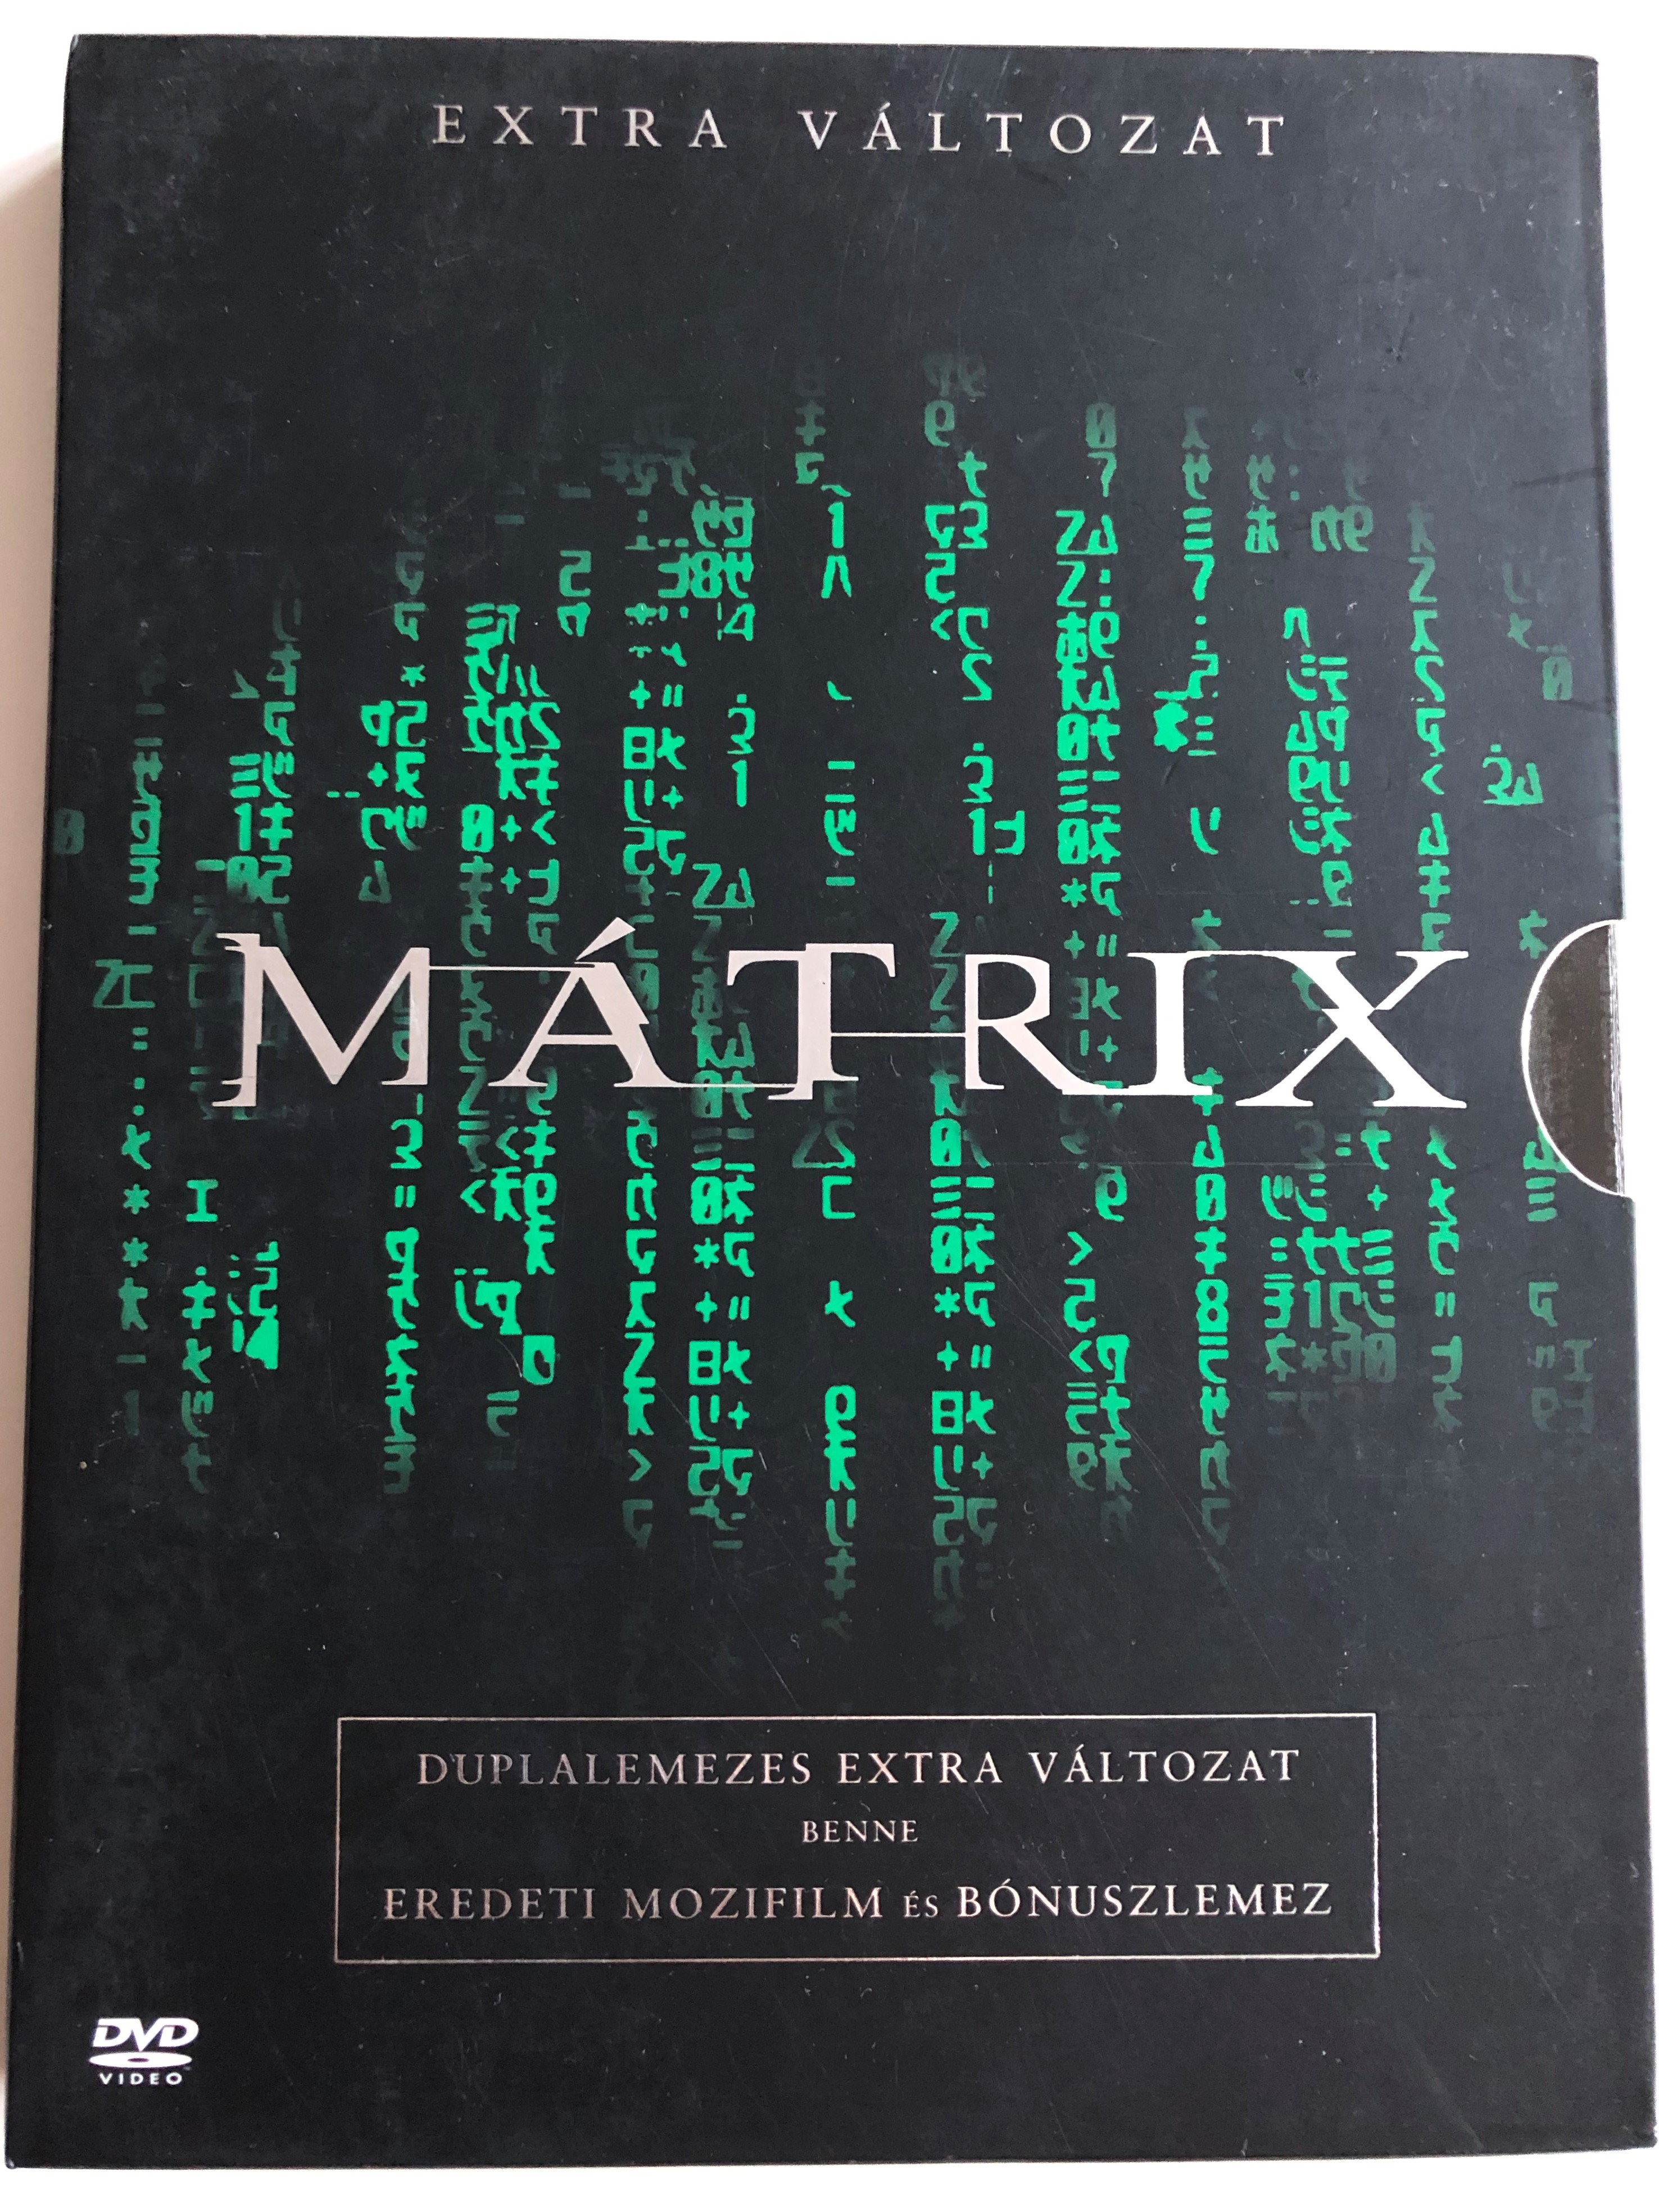 -the-matrix-special-edition-2dvd-1999-m-trix-extra-v-ltozat-directed-by-the-wachowskis-starring-keanu-reeves-laurence-fishbourne-carrie-anne-moss-1-.jpg